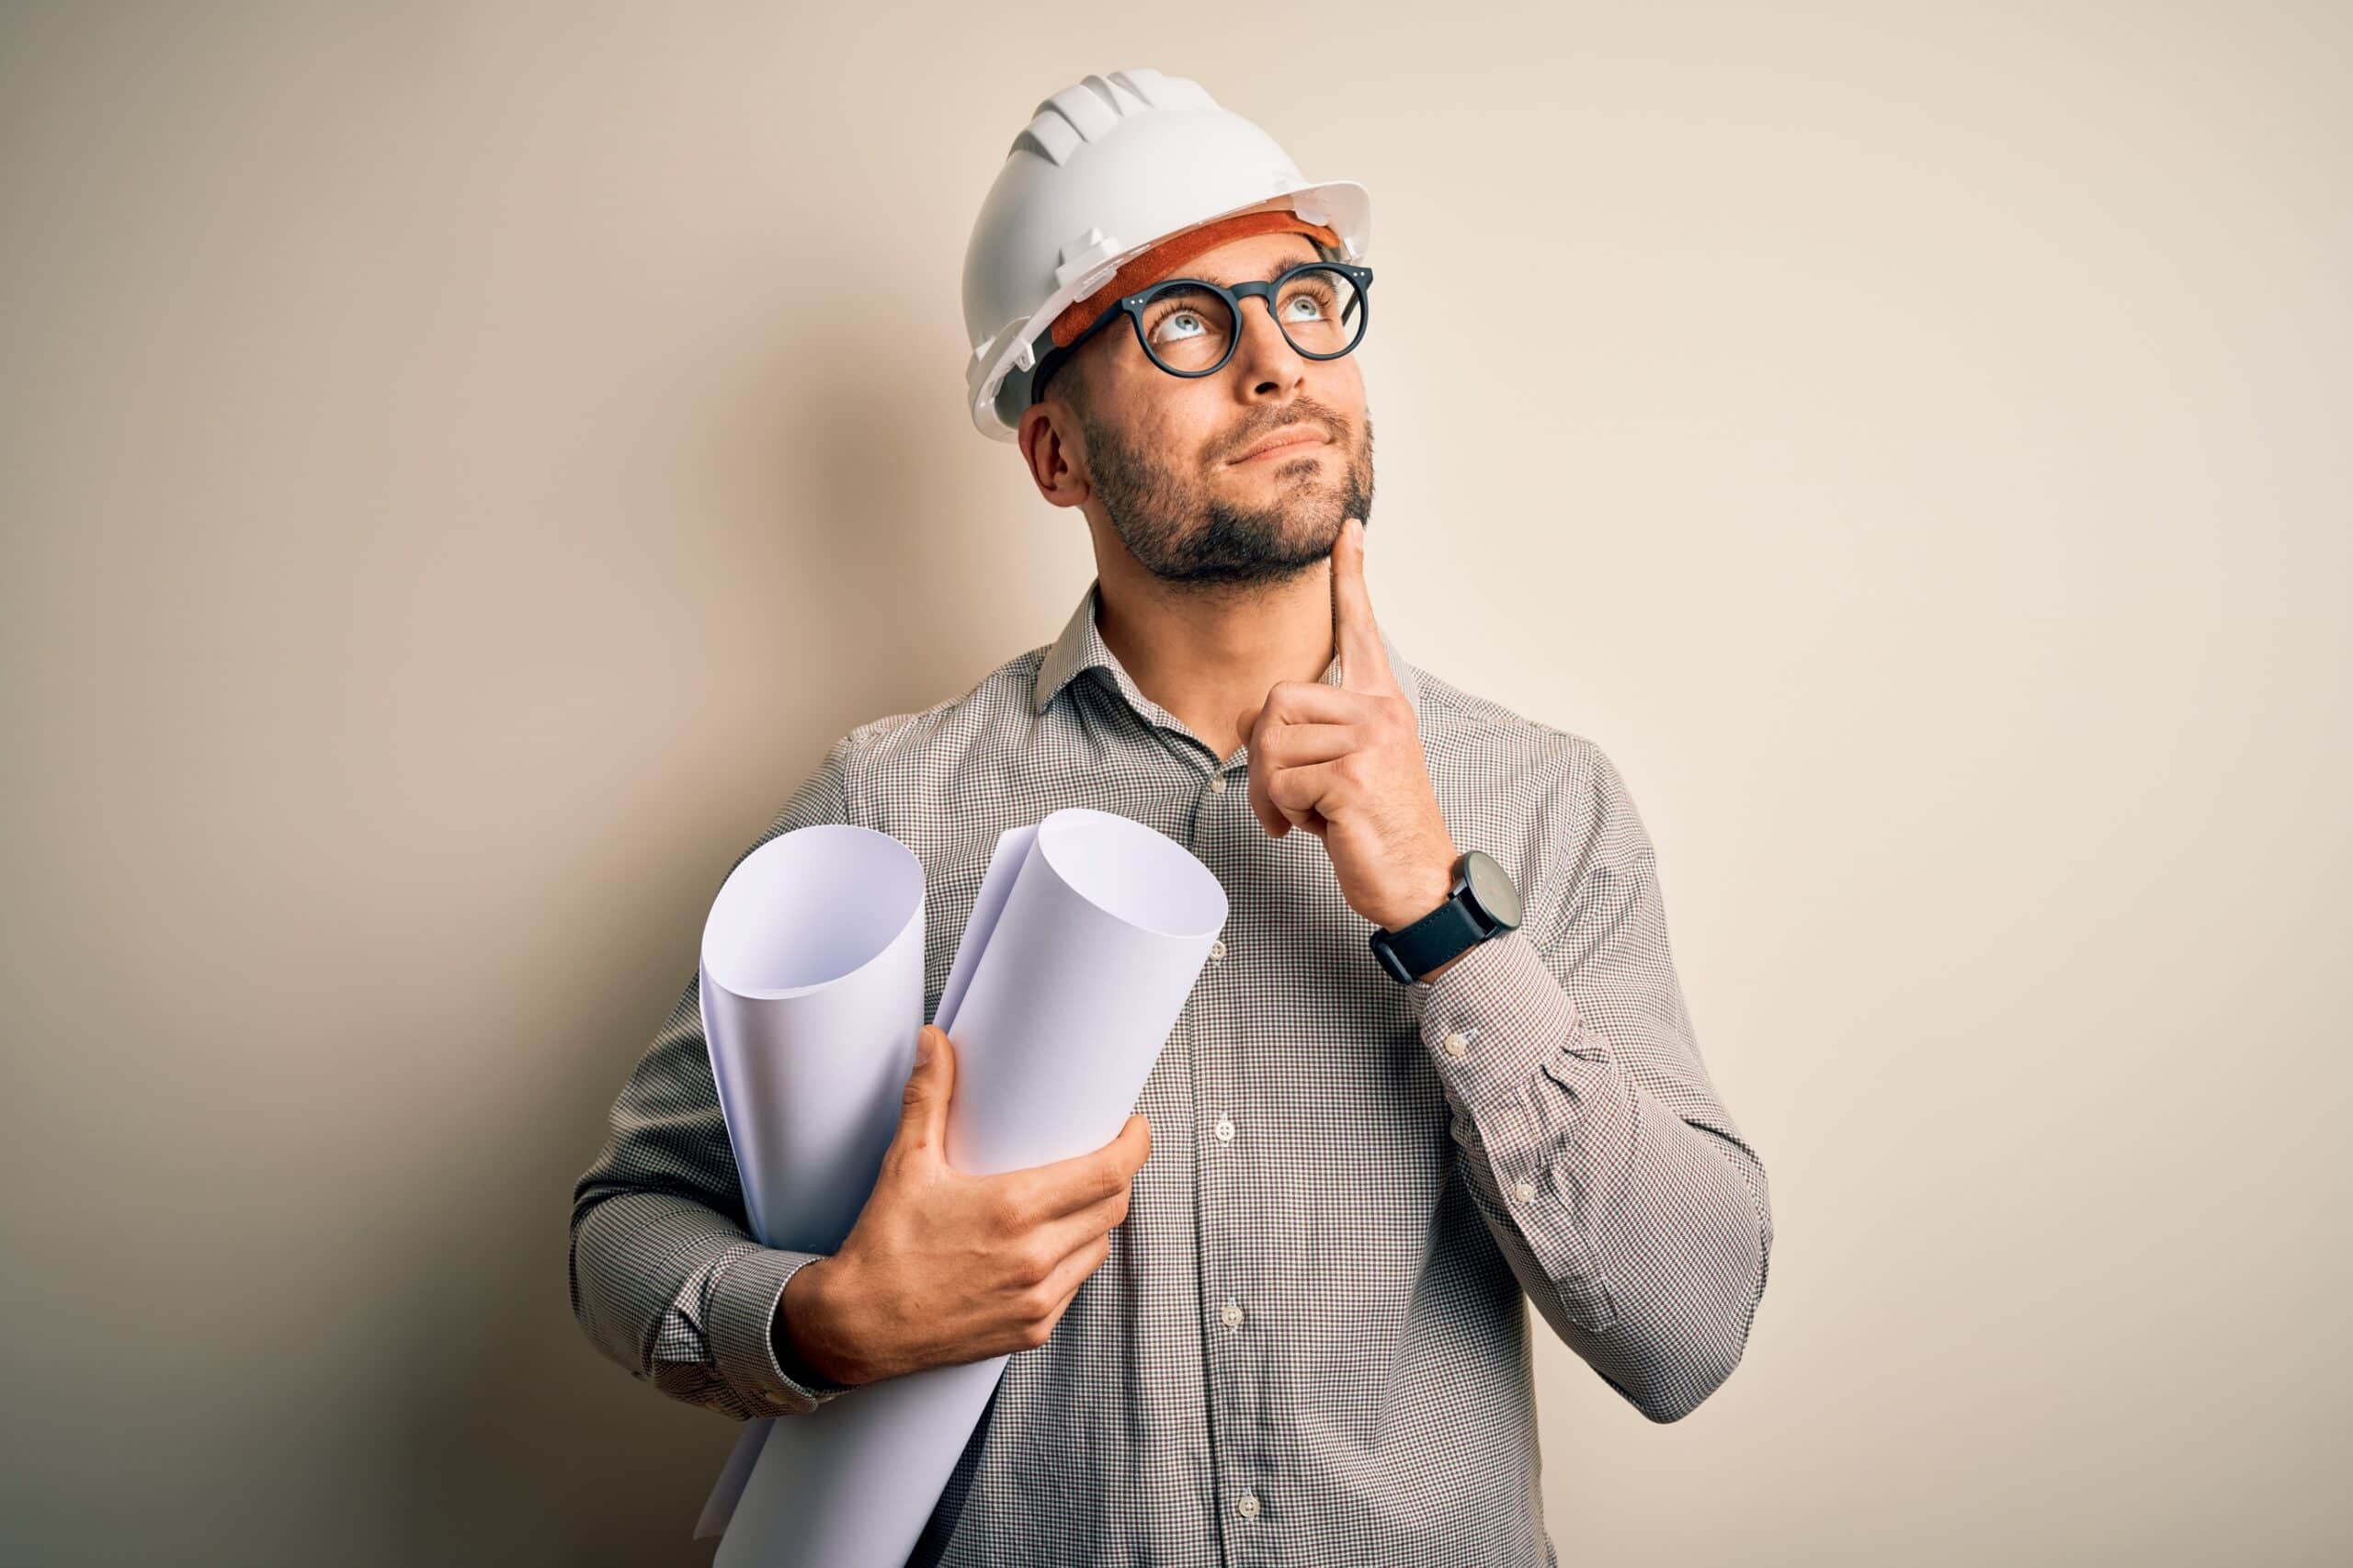 A contractor holding building plans and wearing a white hard had looks as if he's thinking and pondering the benefits of financing through HFS Financial.